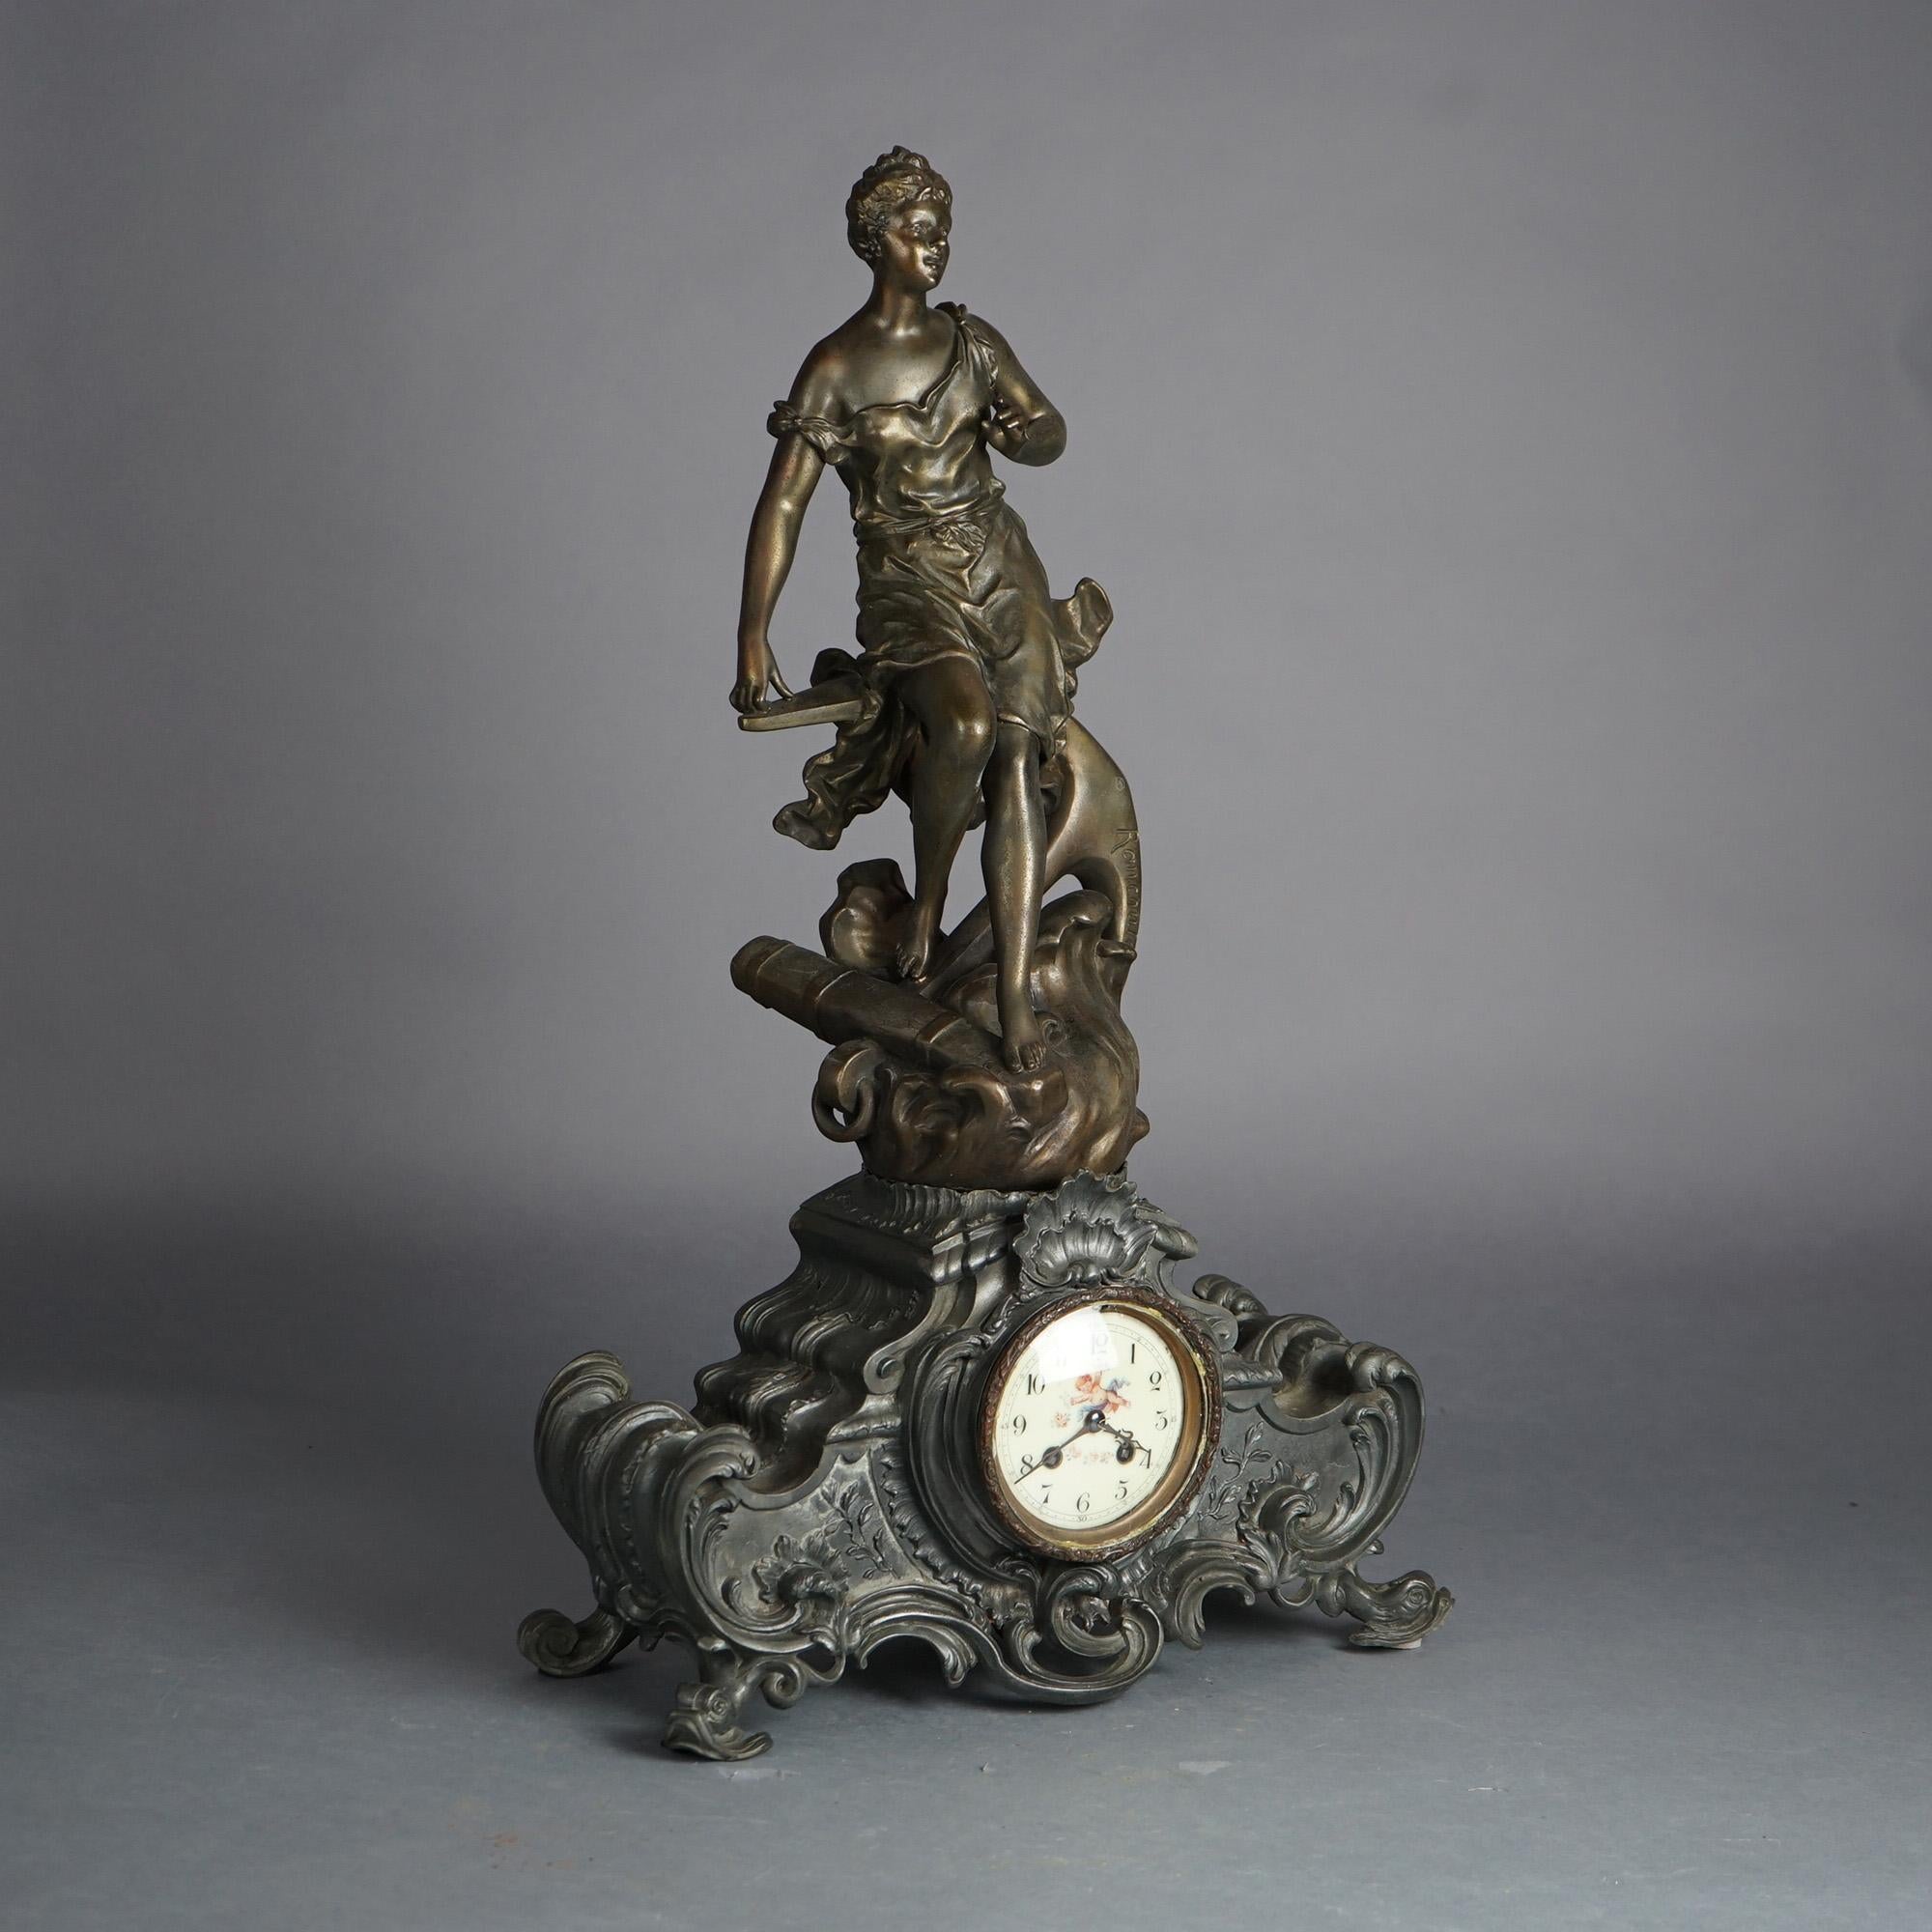 Antique Rococo Revival Bronzed Metal Figural Mantle Clock with Woman and Ship Anchor on Rough Seas on Footed Marble Base, Signed Rancoulet C1890

Measures- 26.5''H x 16''W x 8''D